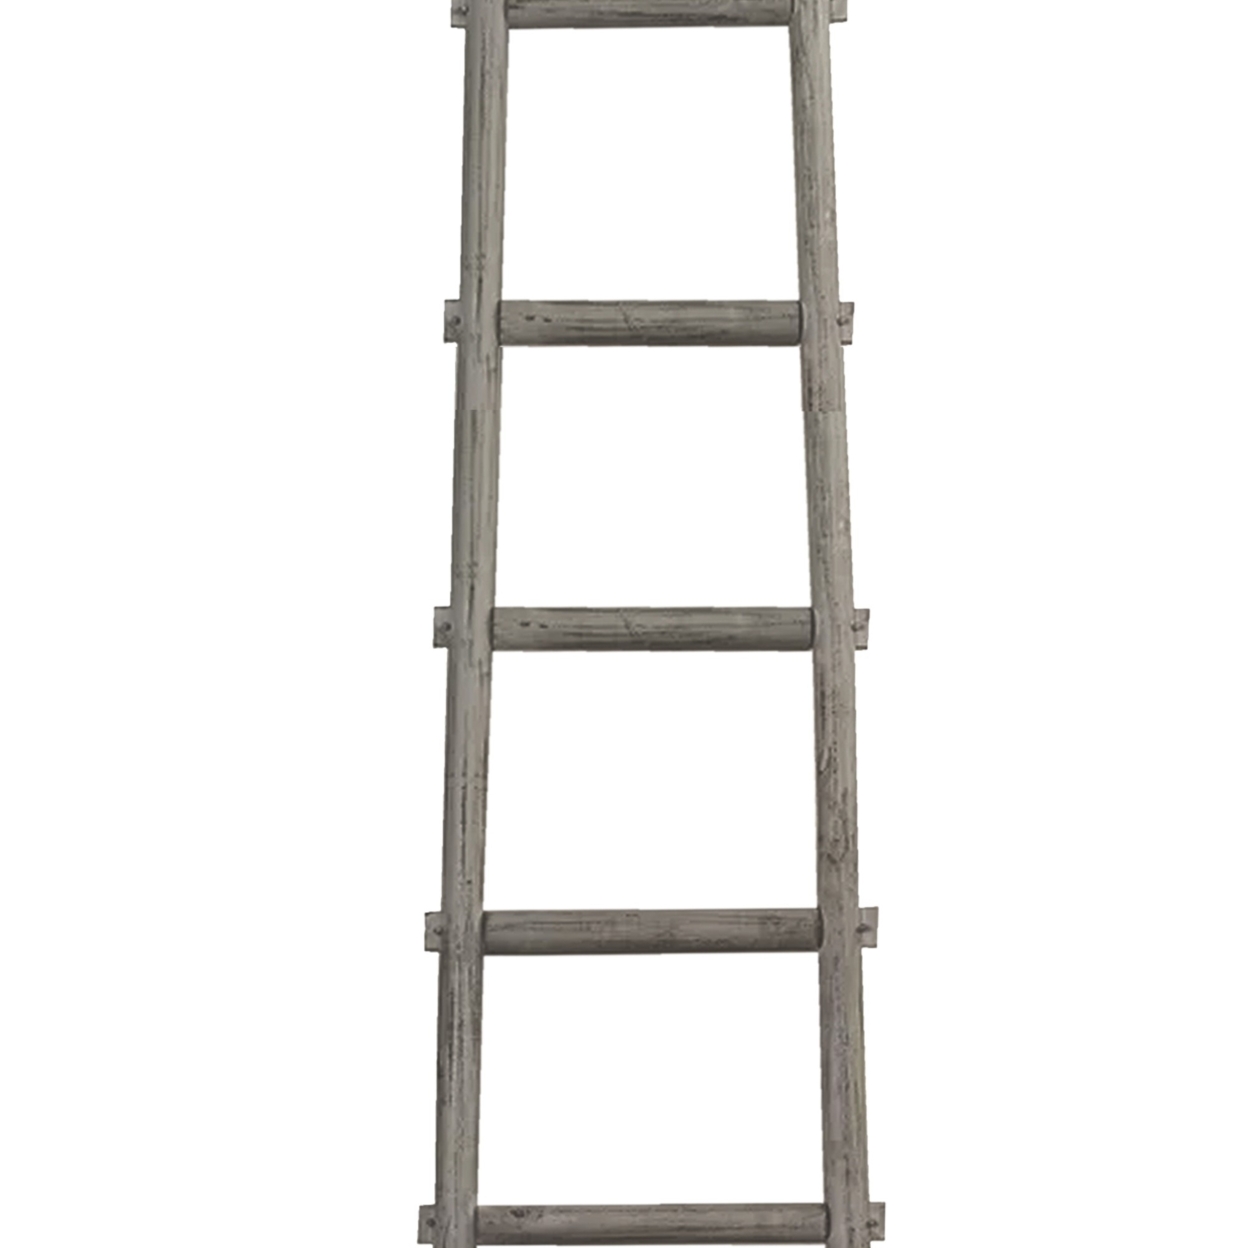 Transitional Style Wooden Decor Ladder With 6 Steps, Gray- Saltoro Sherpi